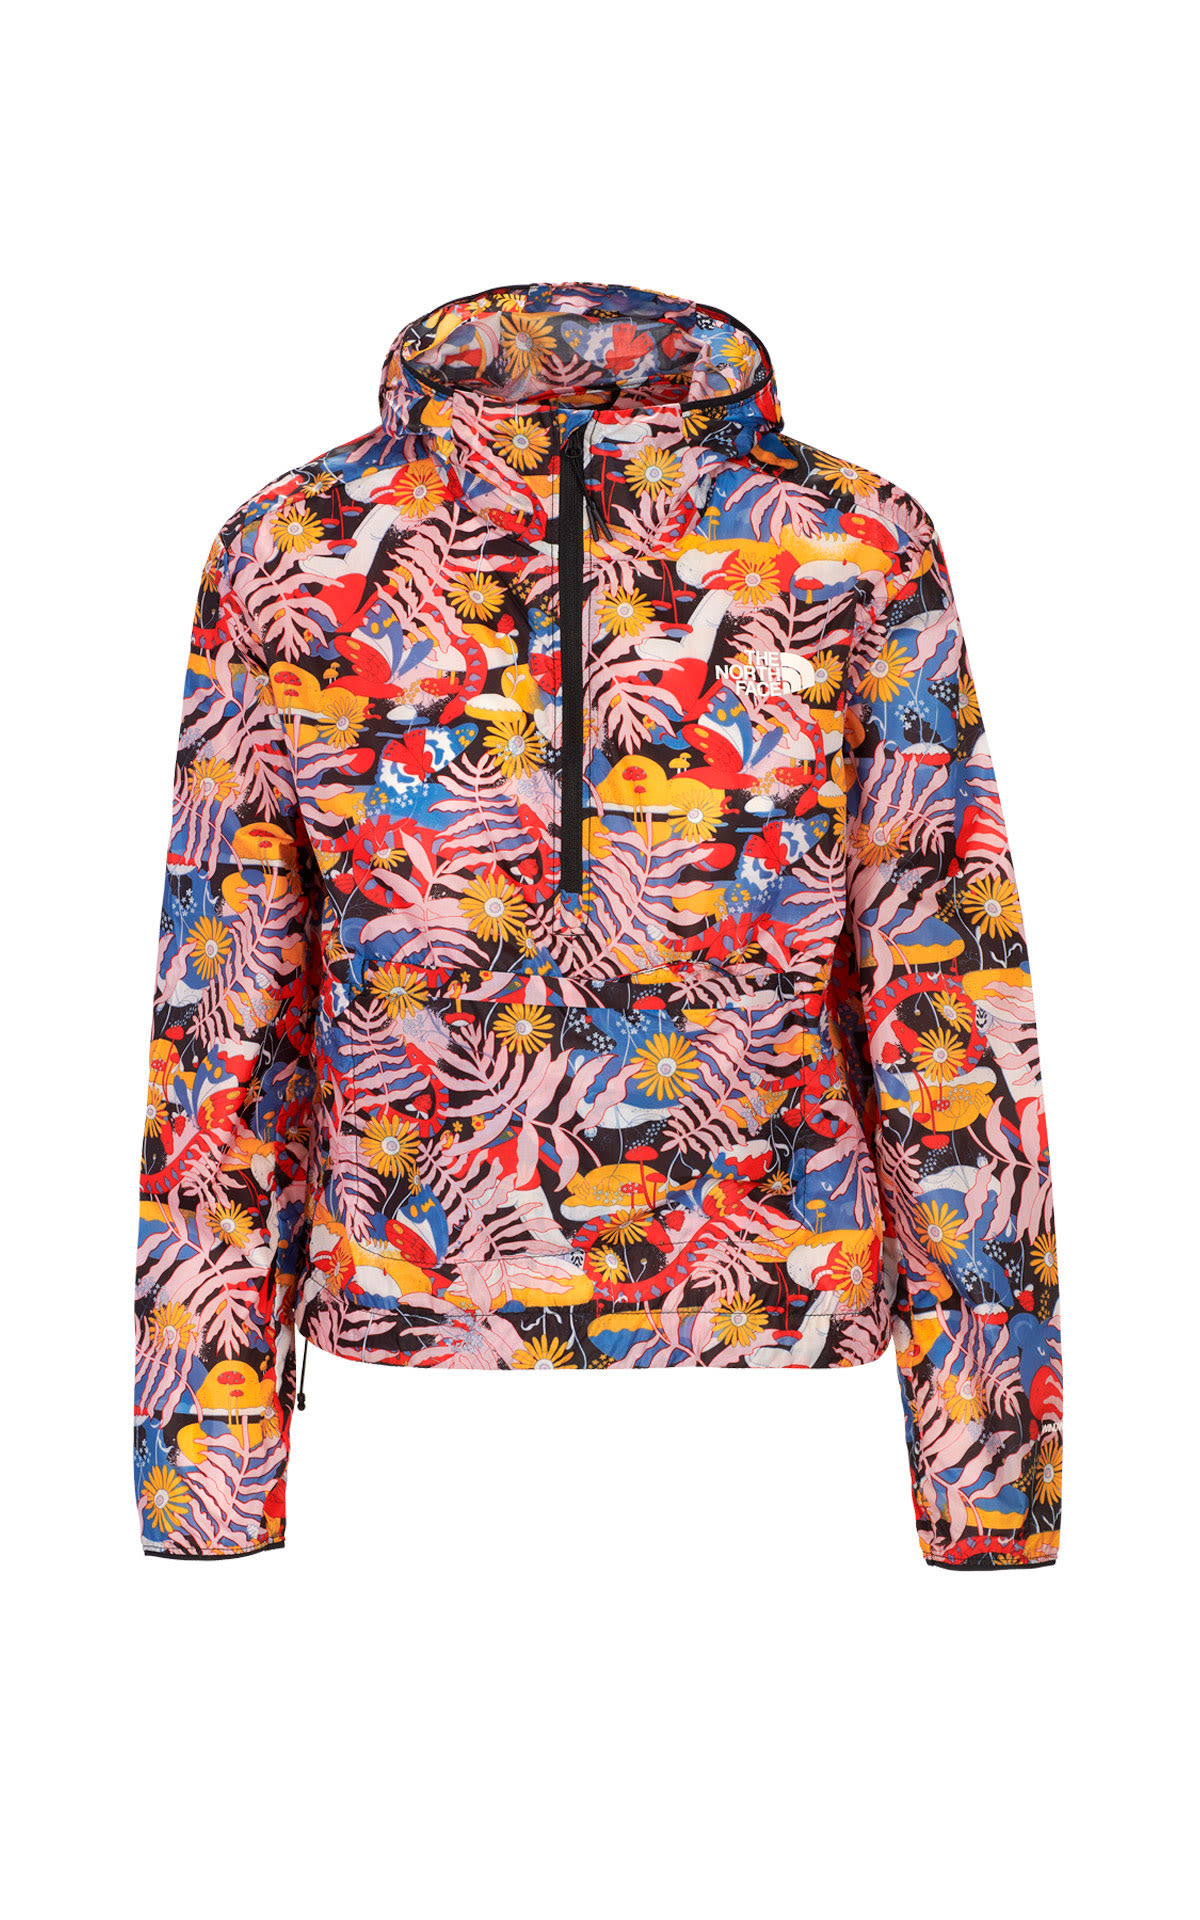 Flower print jacketThe North Face